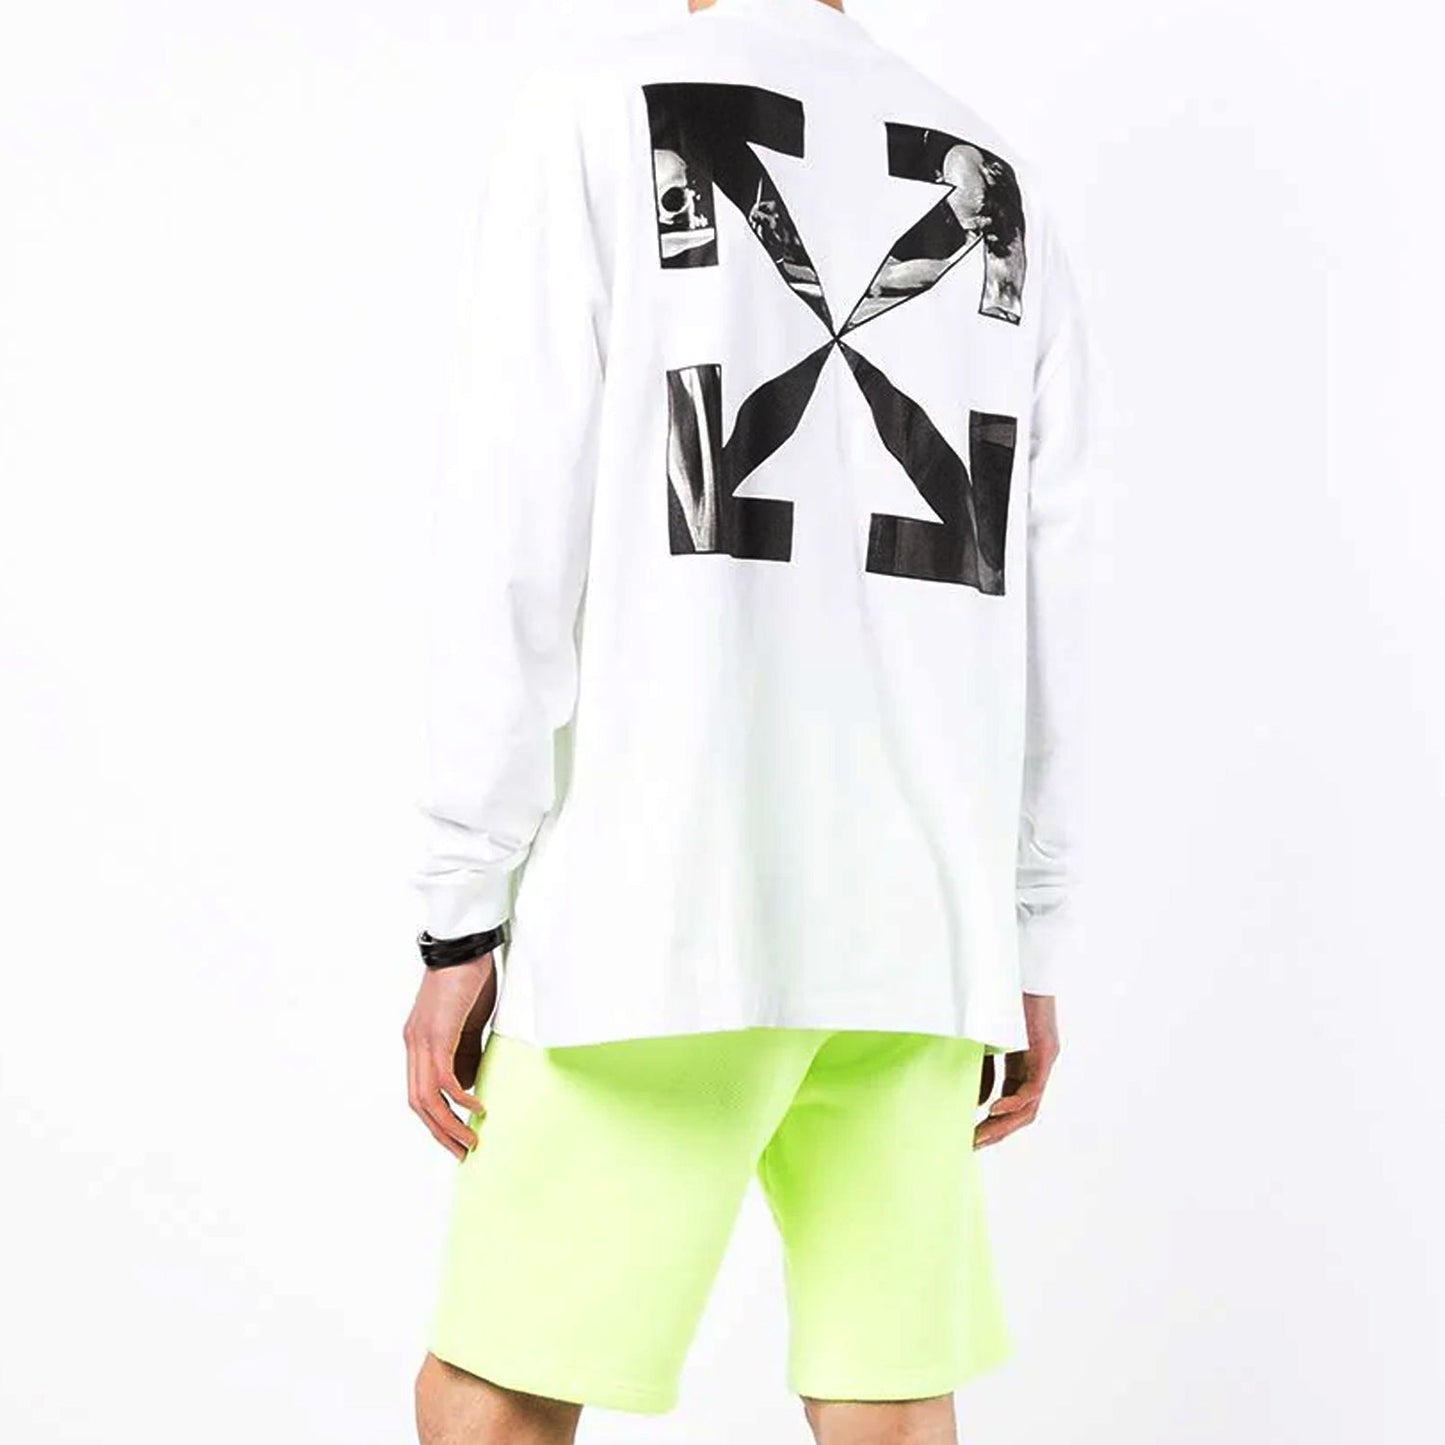 Off-white Caravag Arrow Over Mocknsc Mens Style : Omab032c99jer00